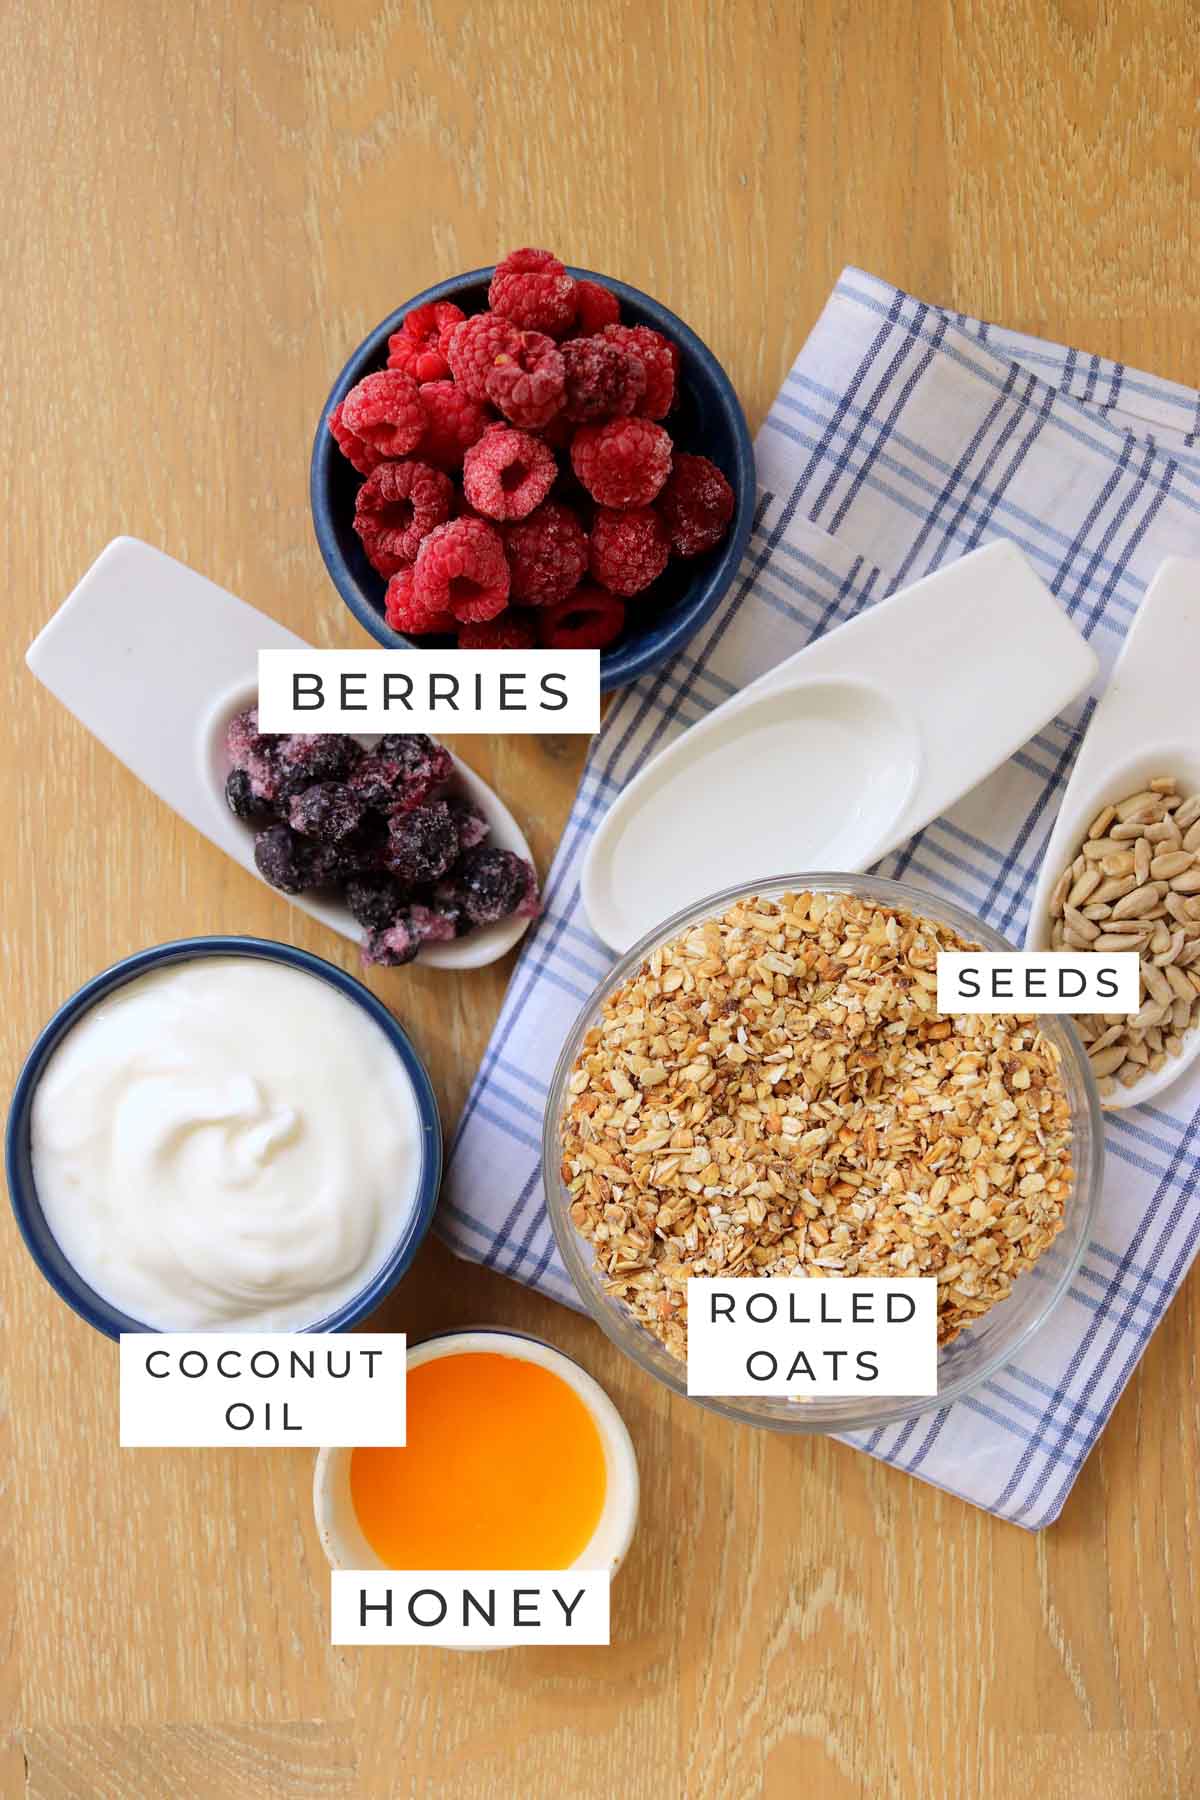 Labeled ingredients for the parfait.